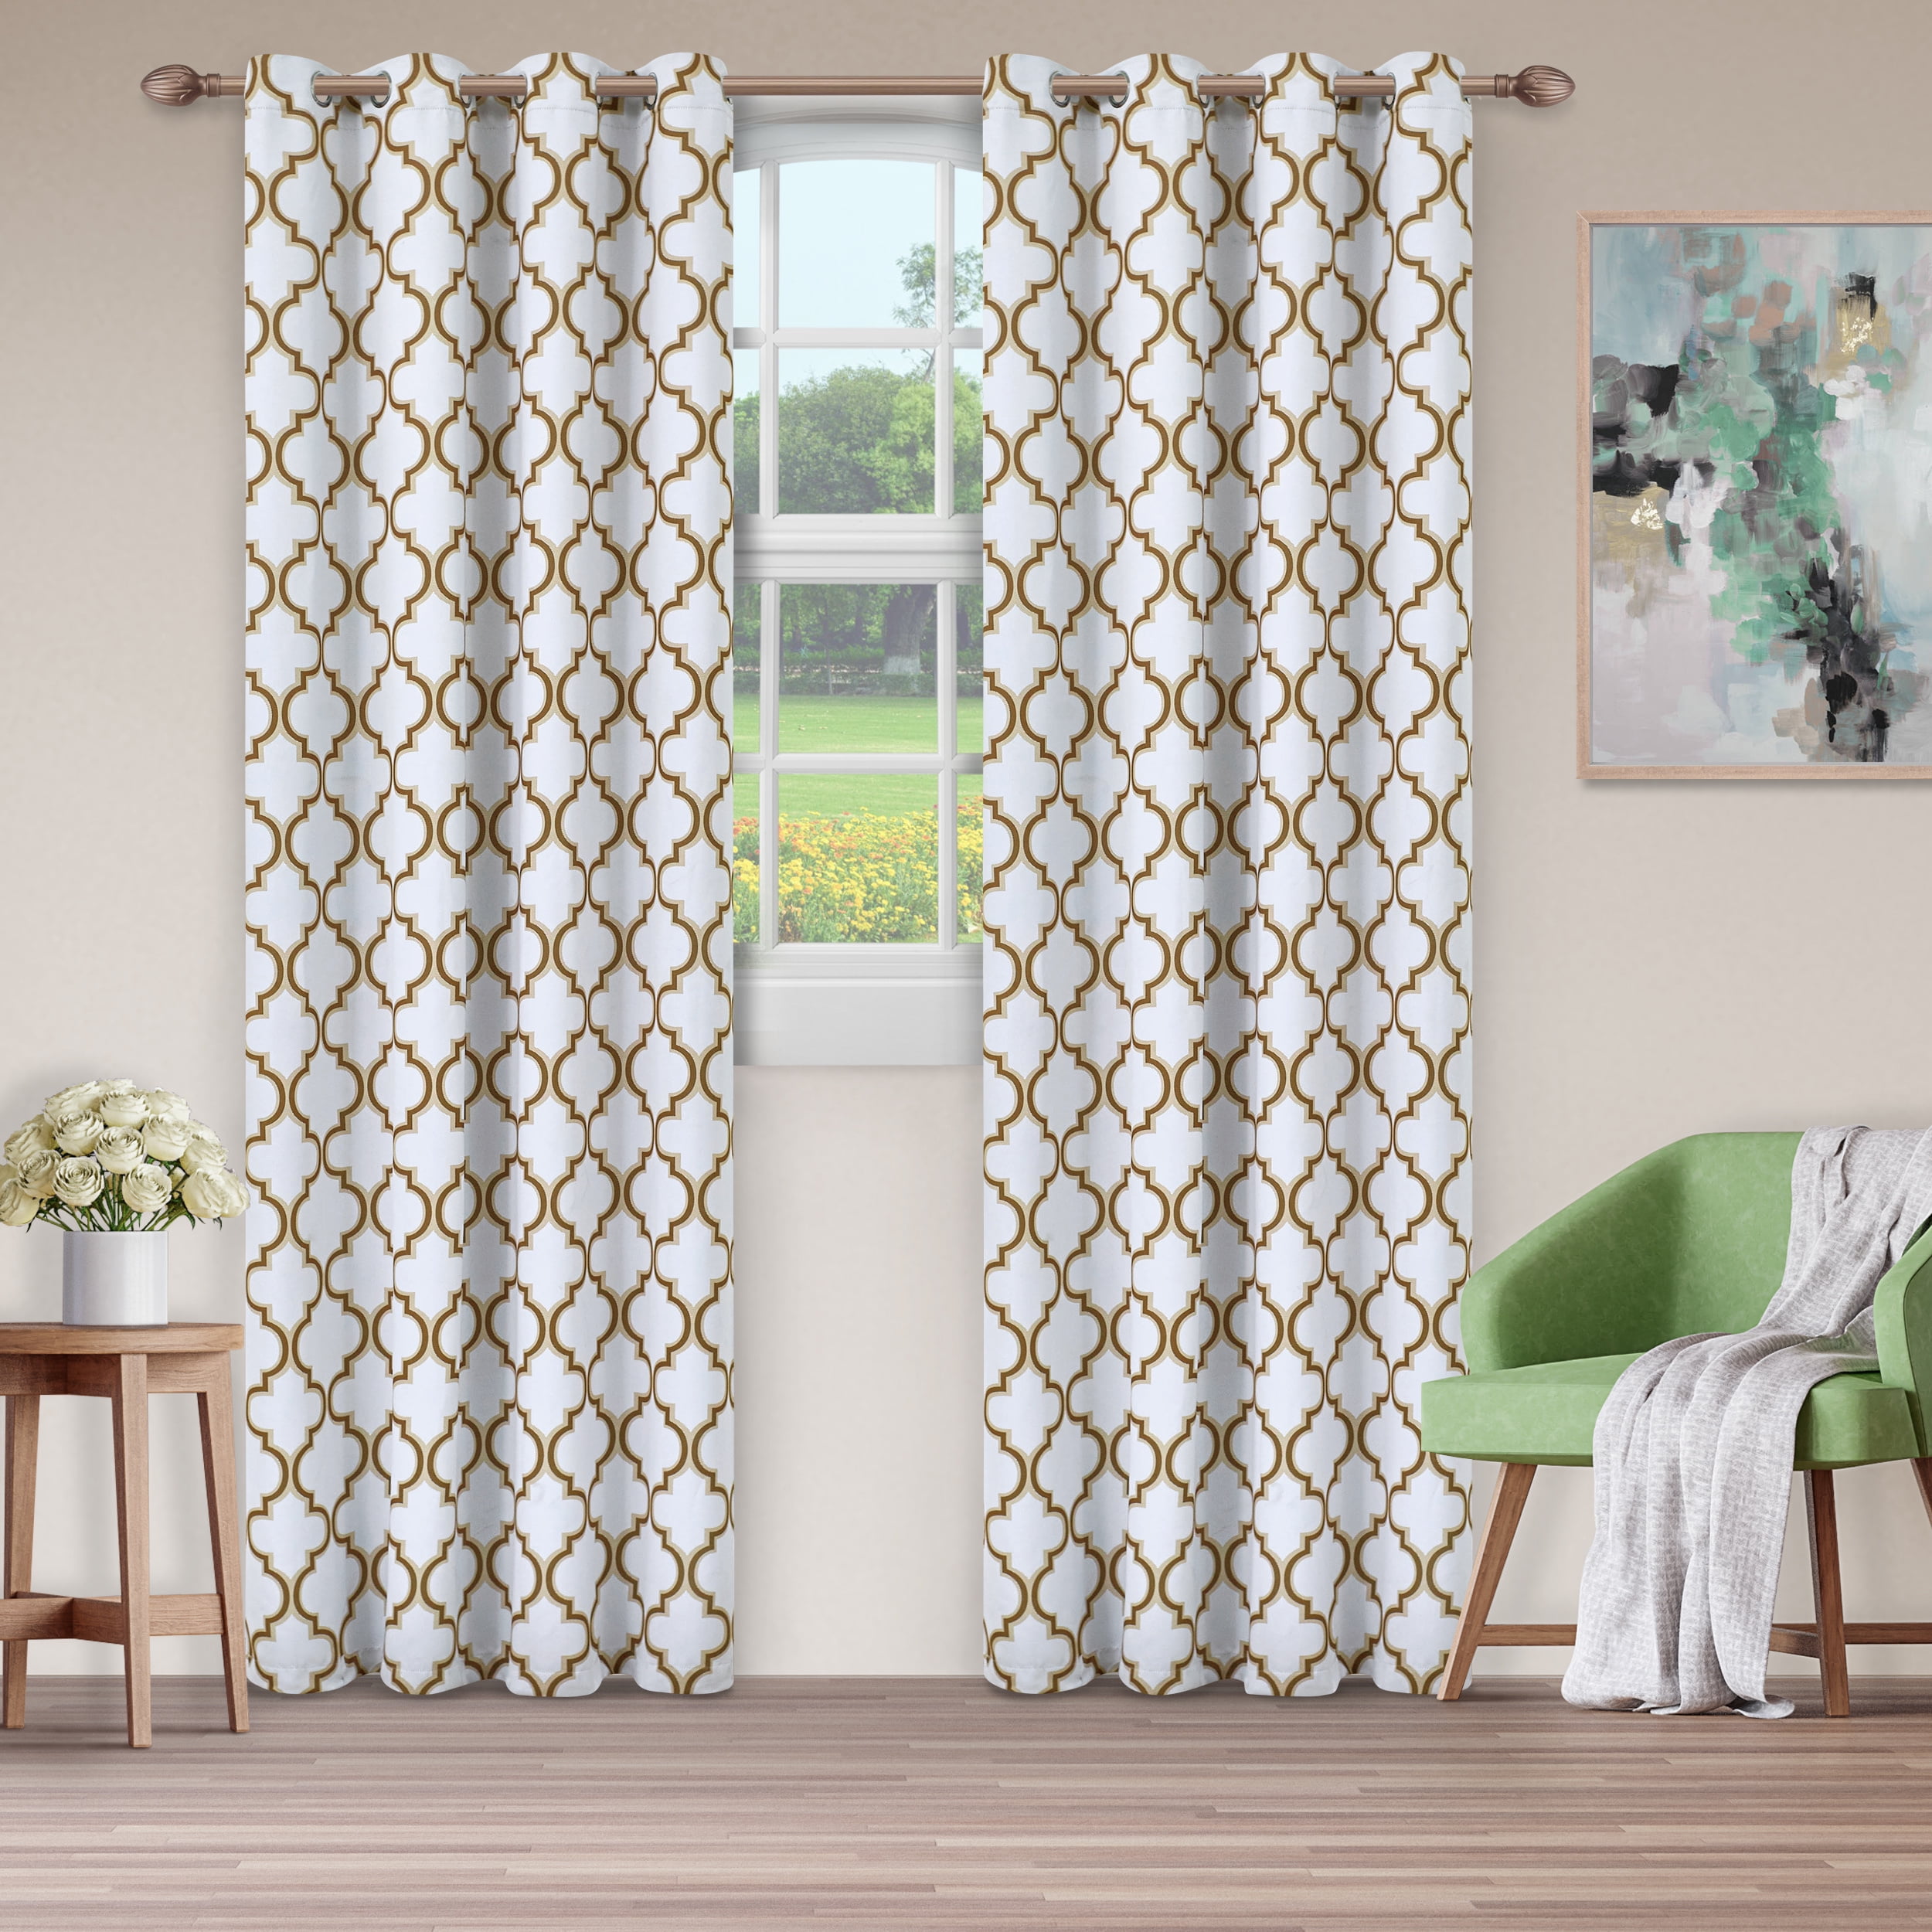 TreeWool 2 Panel Window Curtain for Living Bedroom Trellis Design with Eyelets